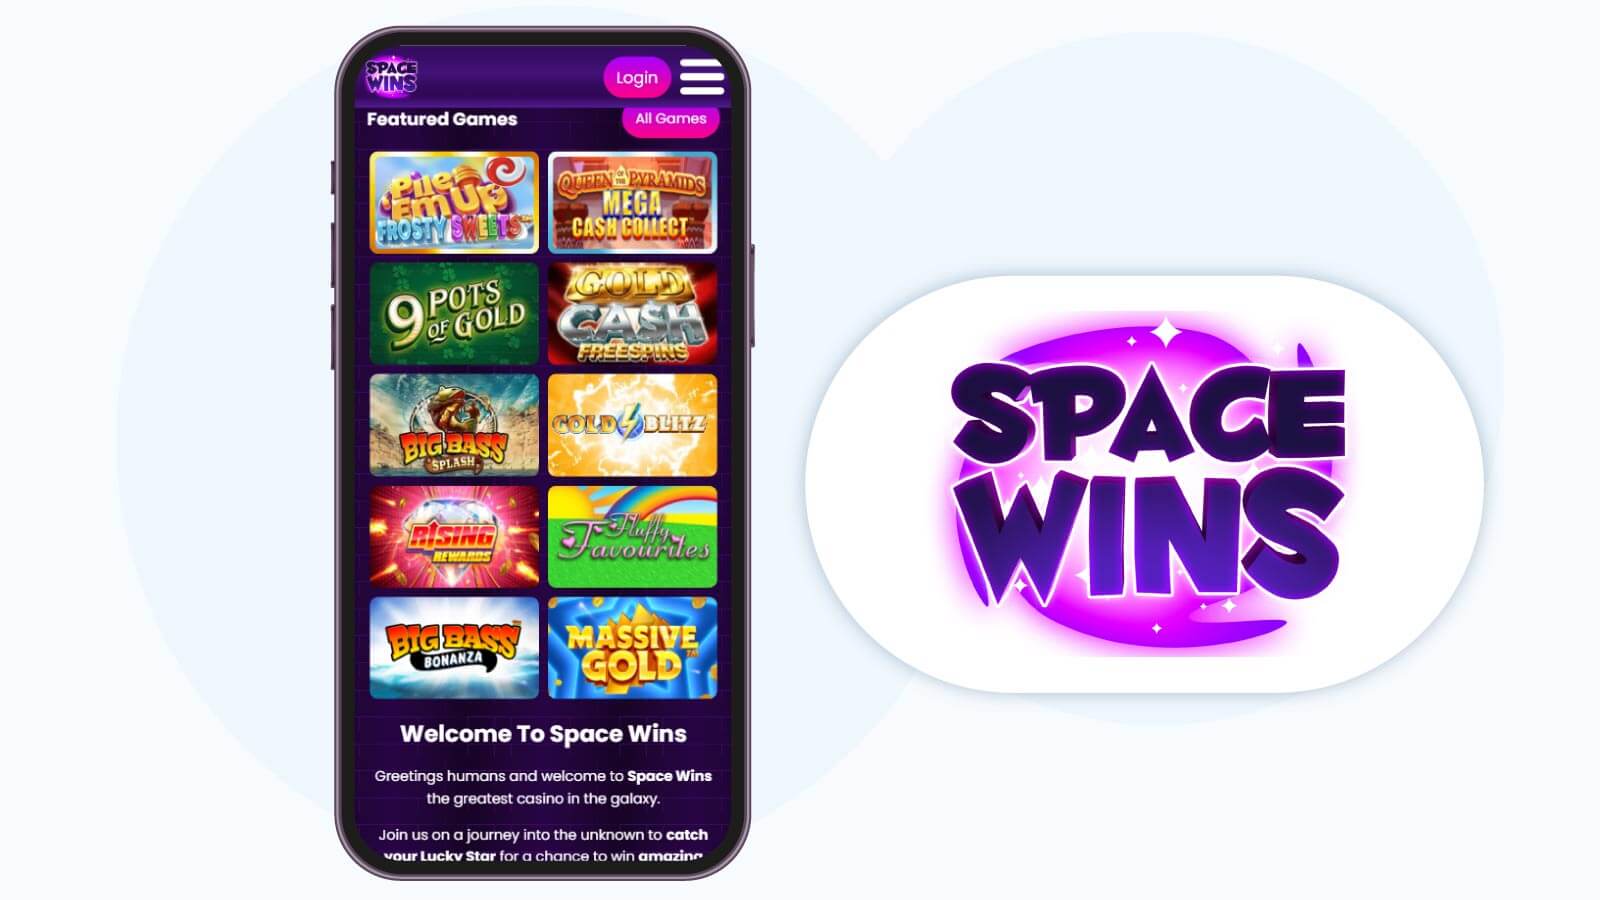 Space Wins – Best for Slots Variety